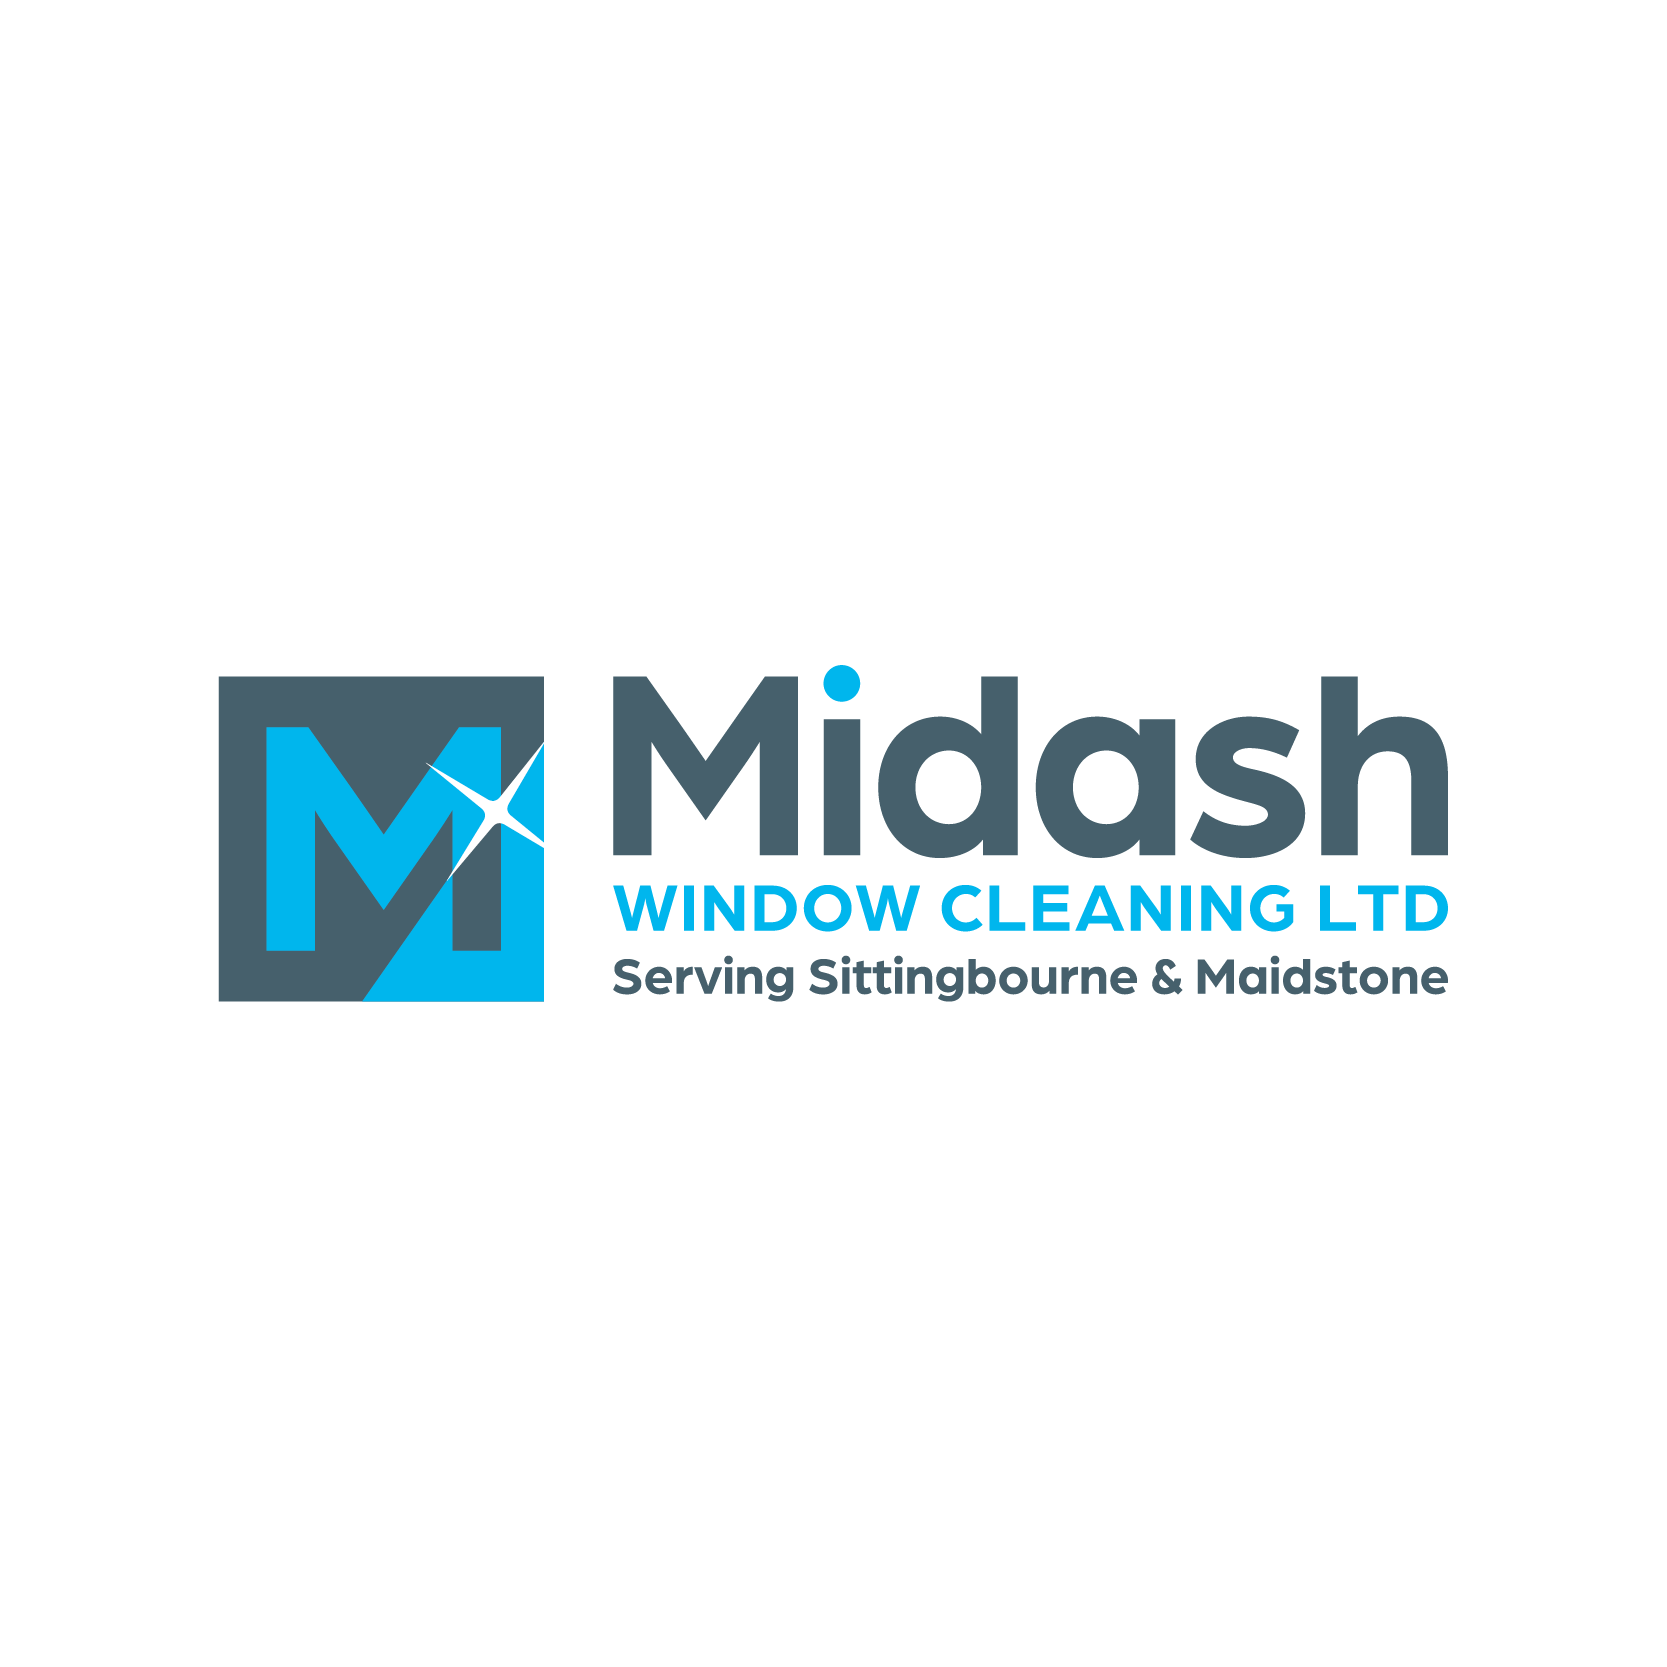 Logo Design for Window Cleaning Business